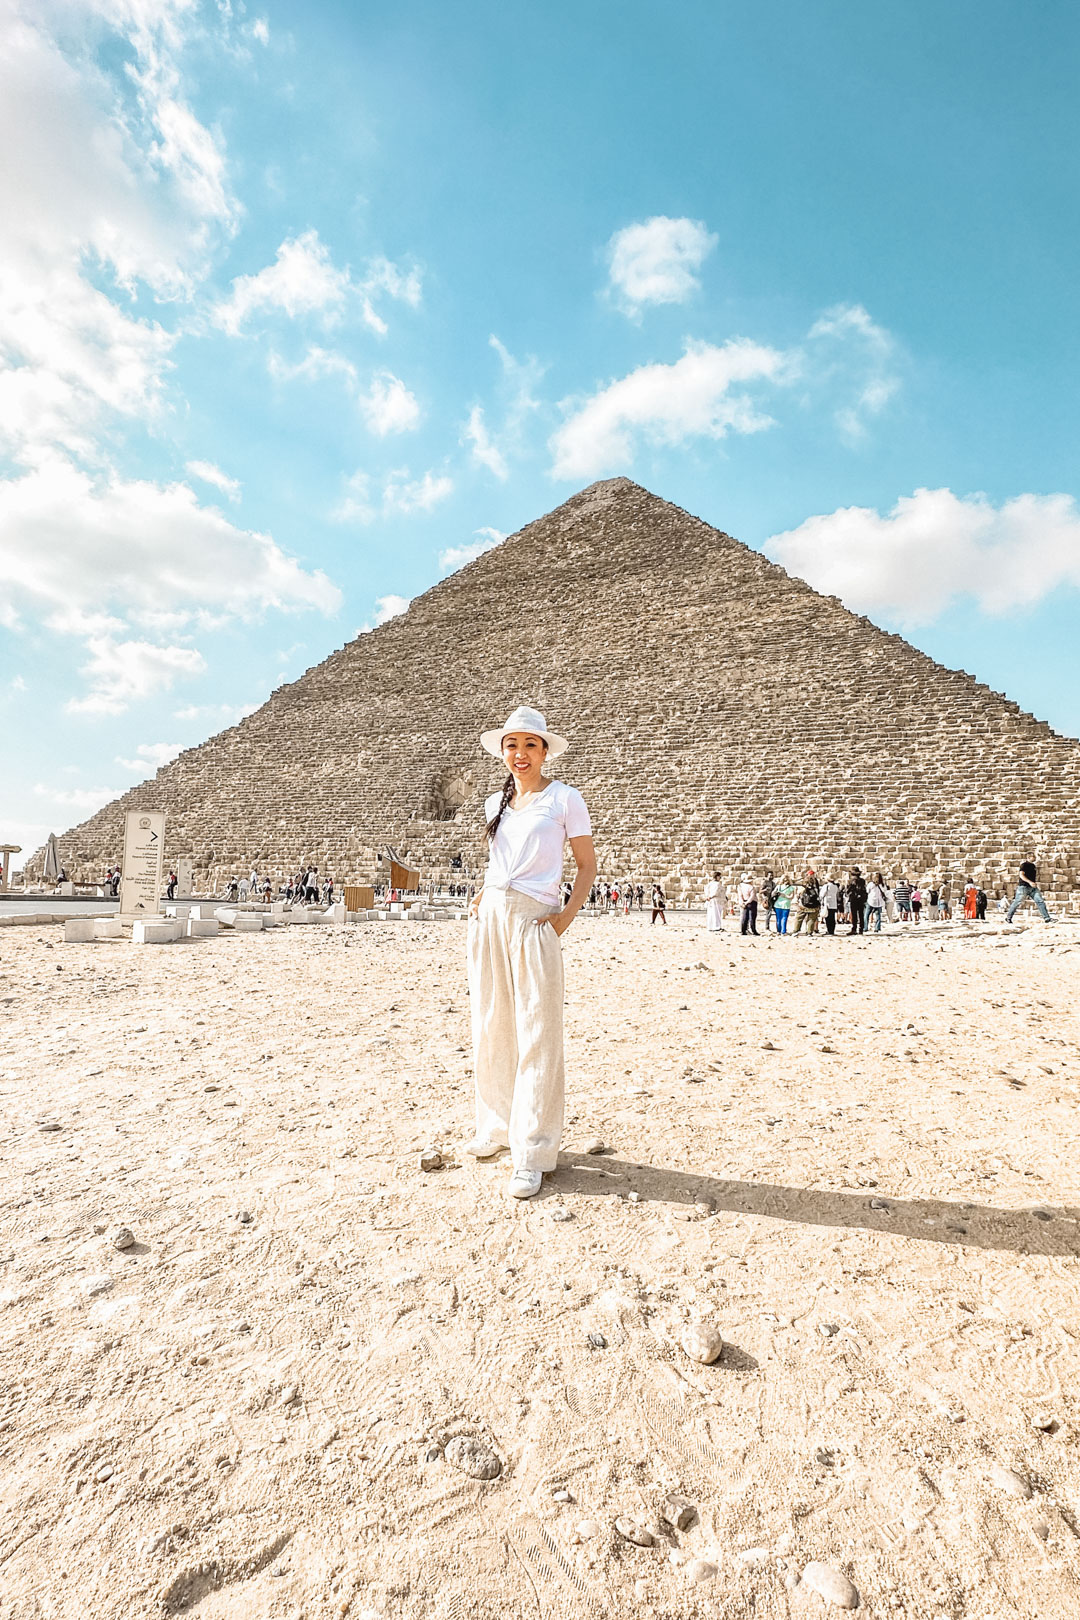 The Ultimate Guide to Visiting the Pyramids 2023